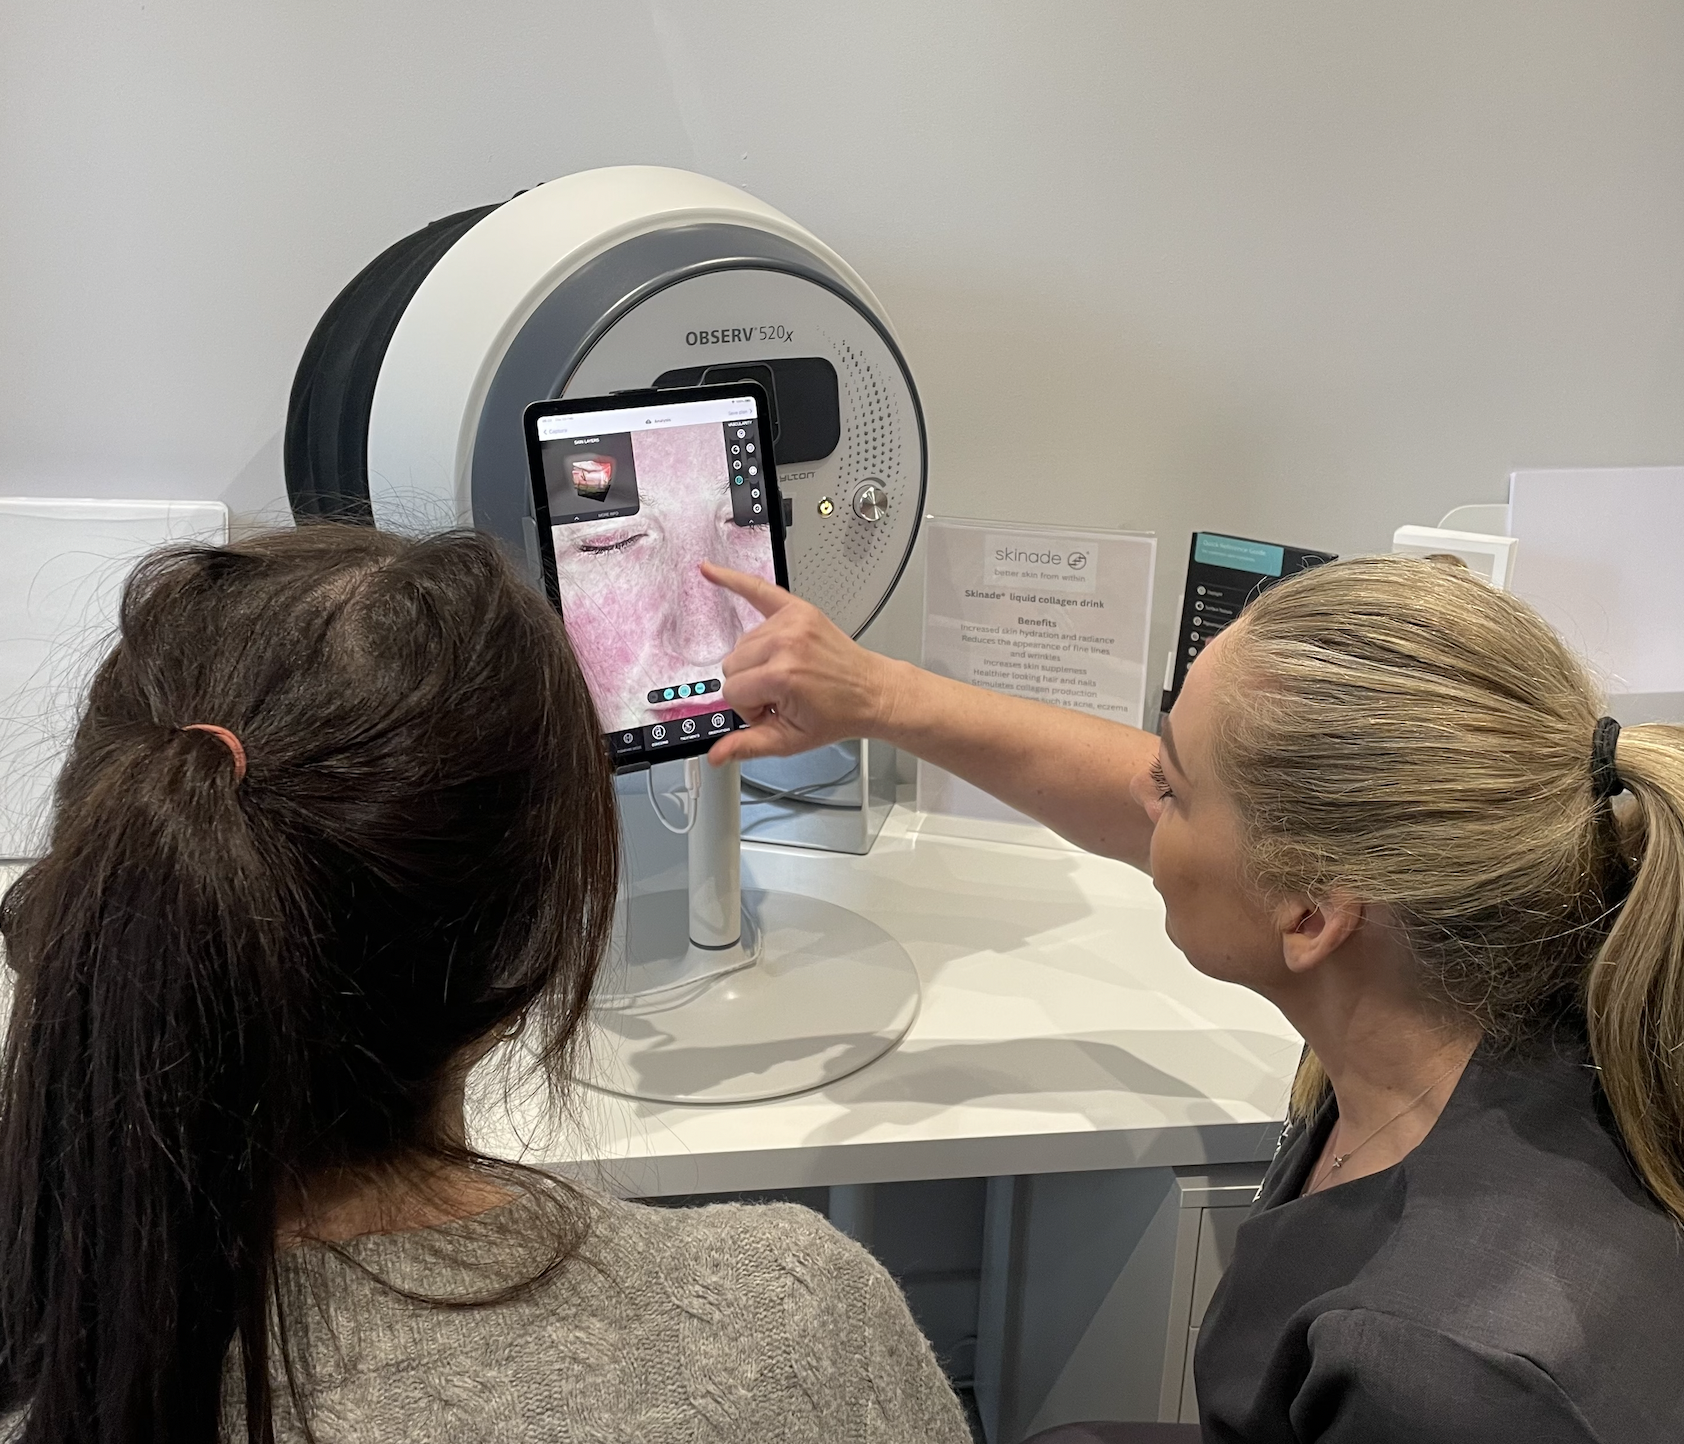 Observ facial skin analysis in Plymouth